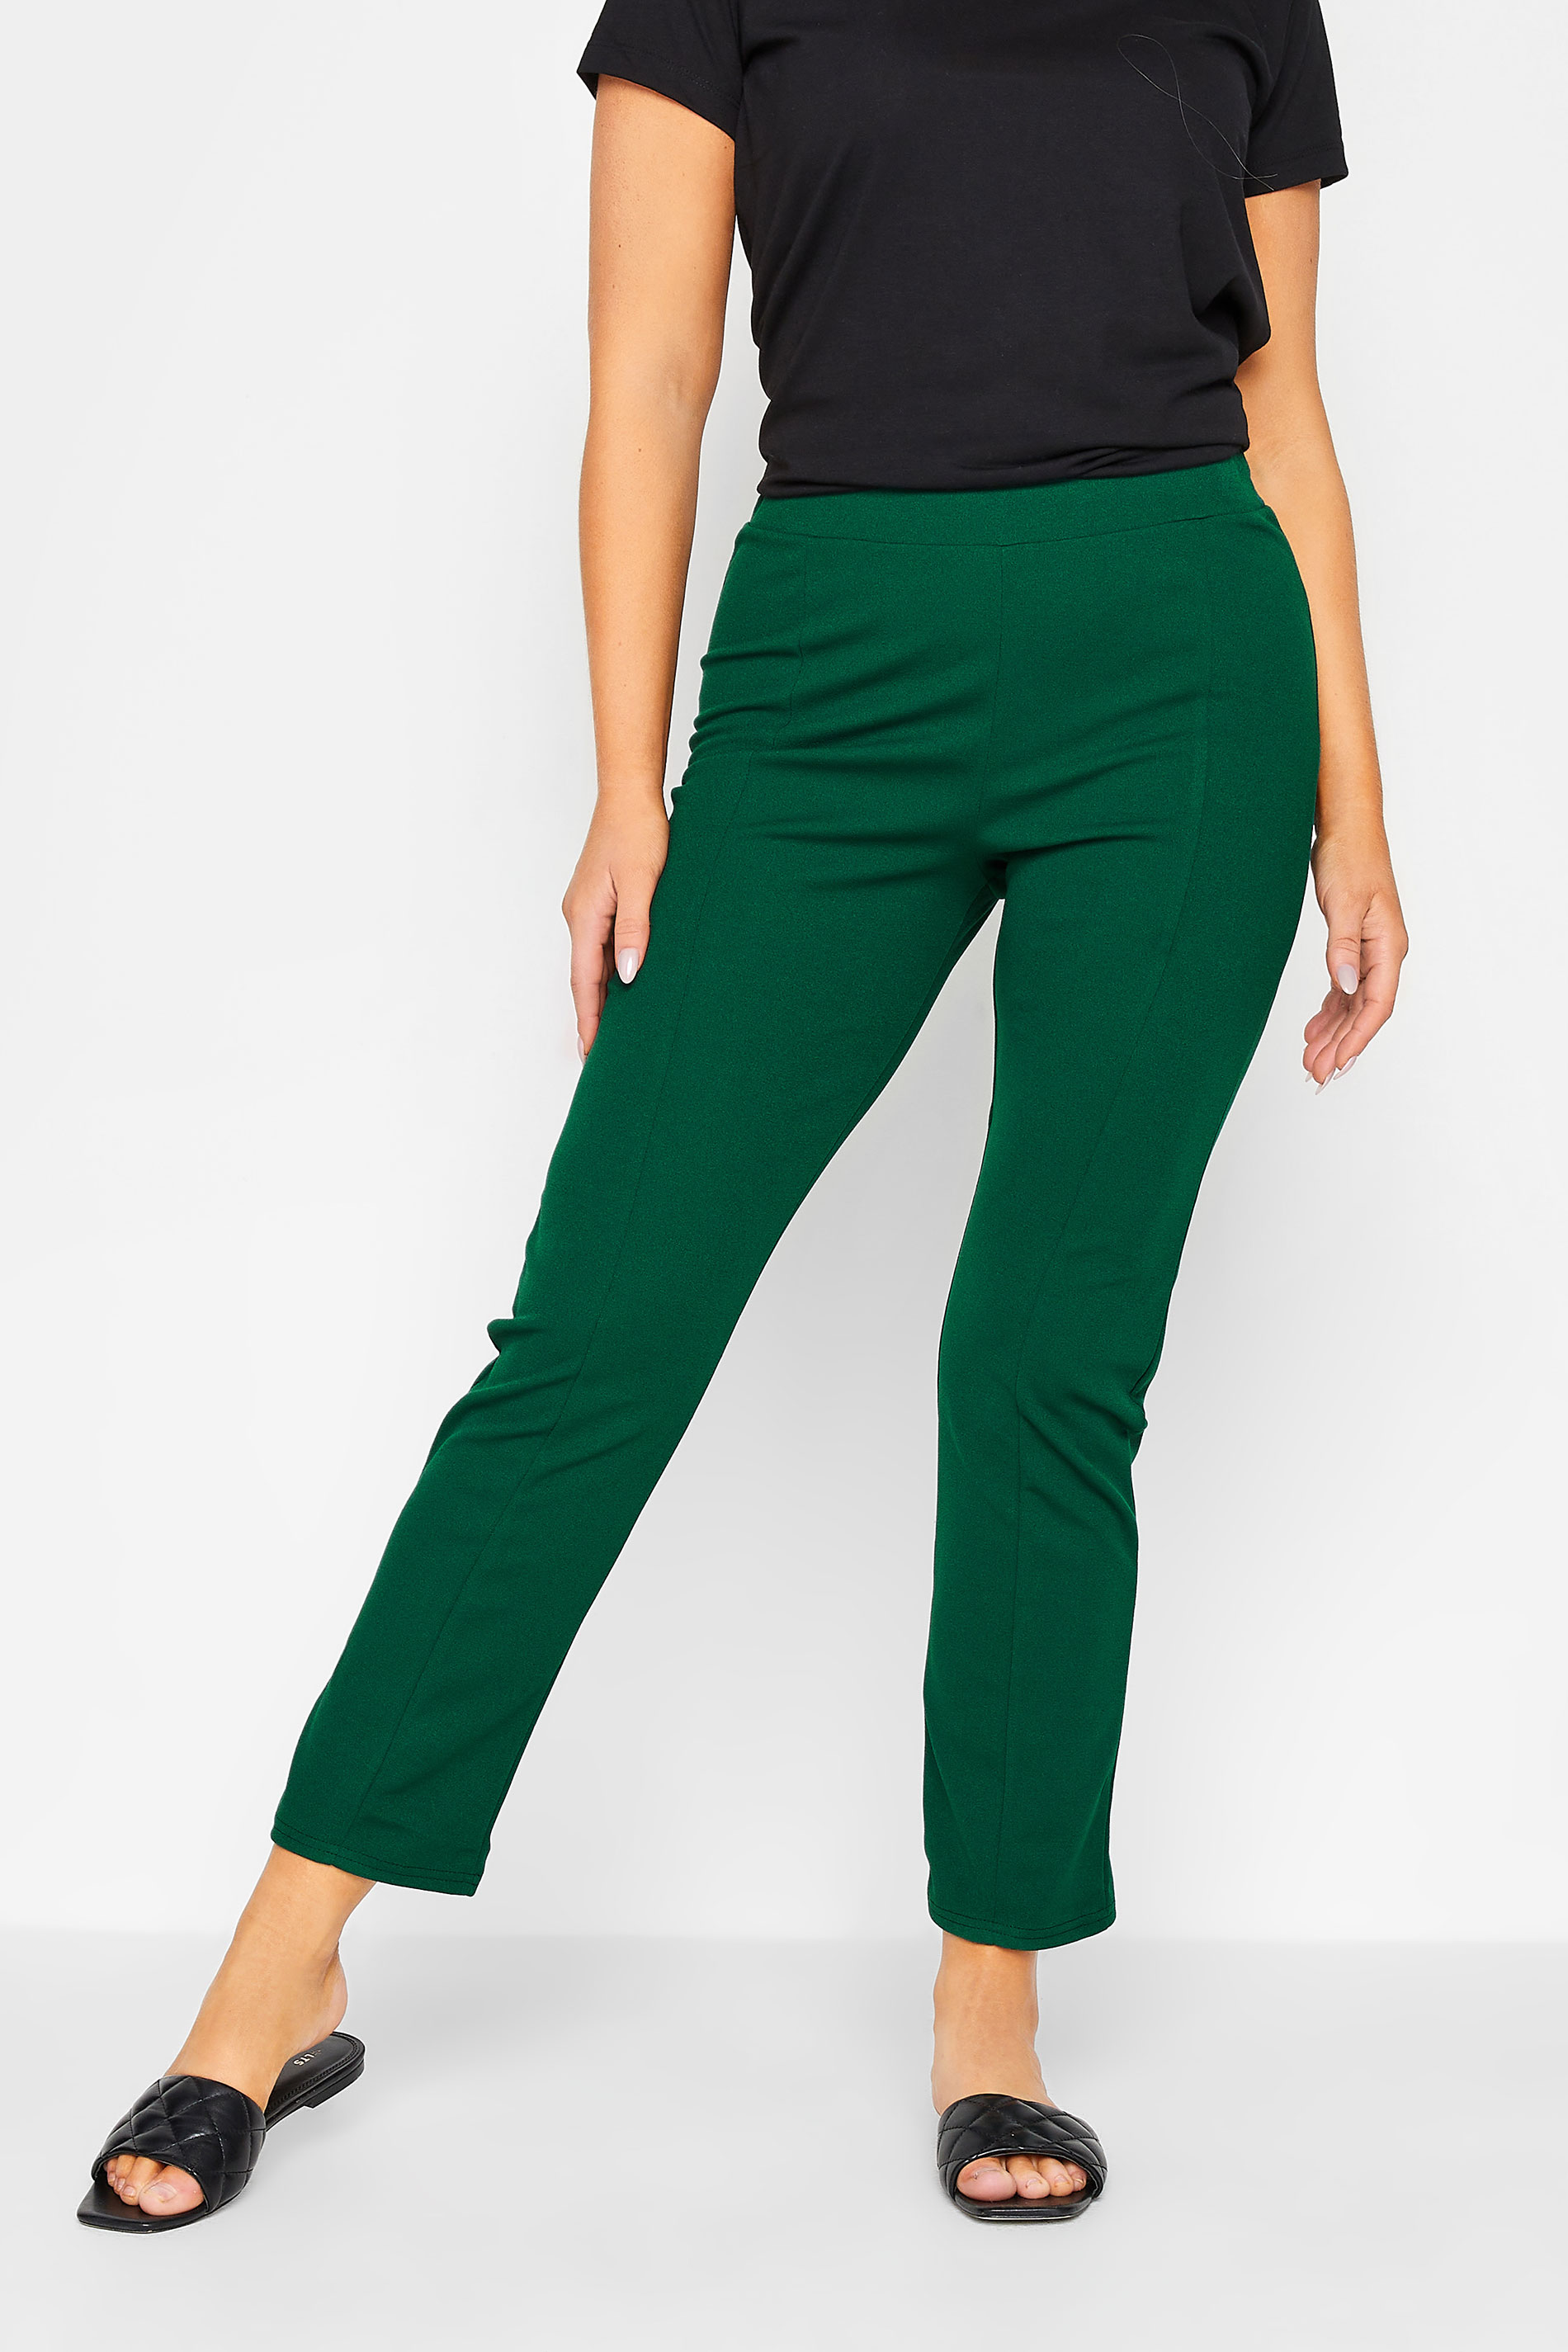 M&Co Green Stretch Tapered Trousers | M&Co 1